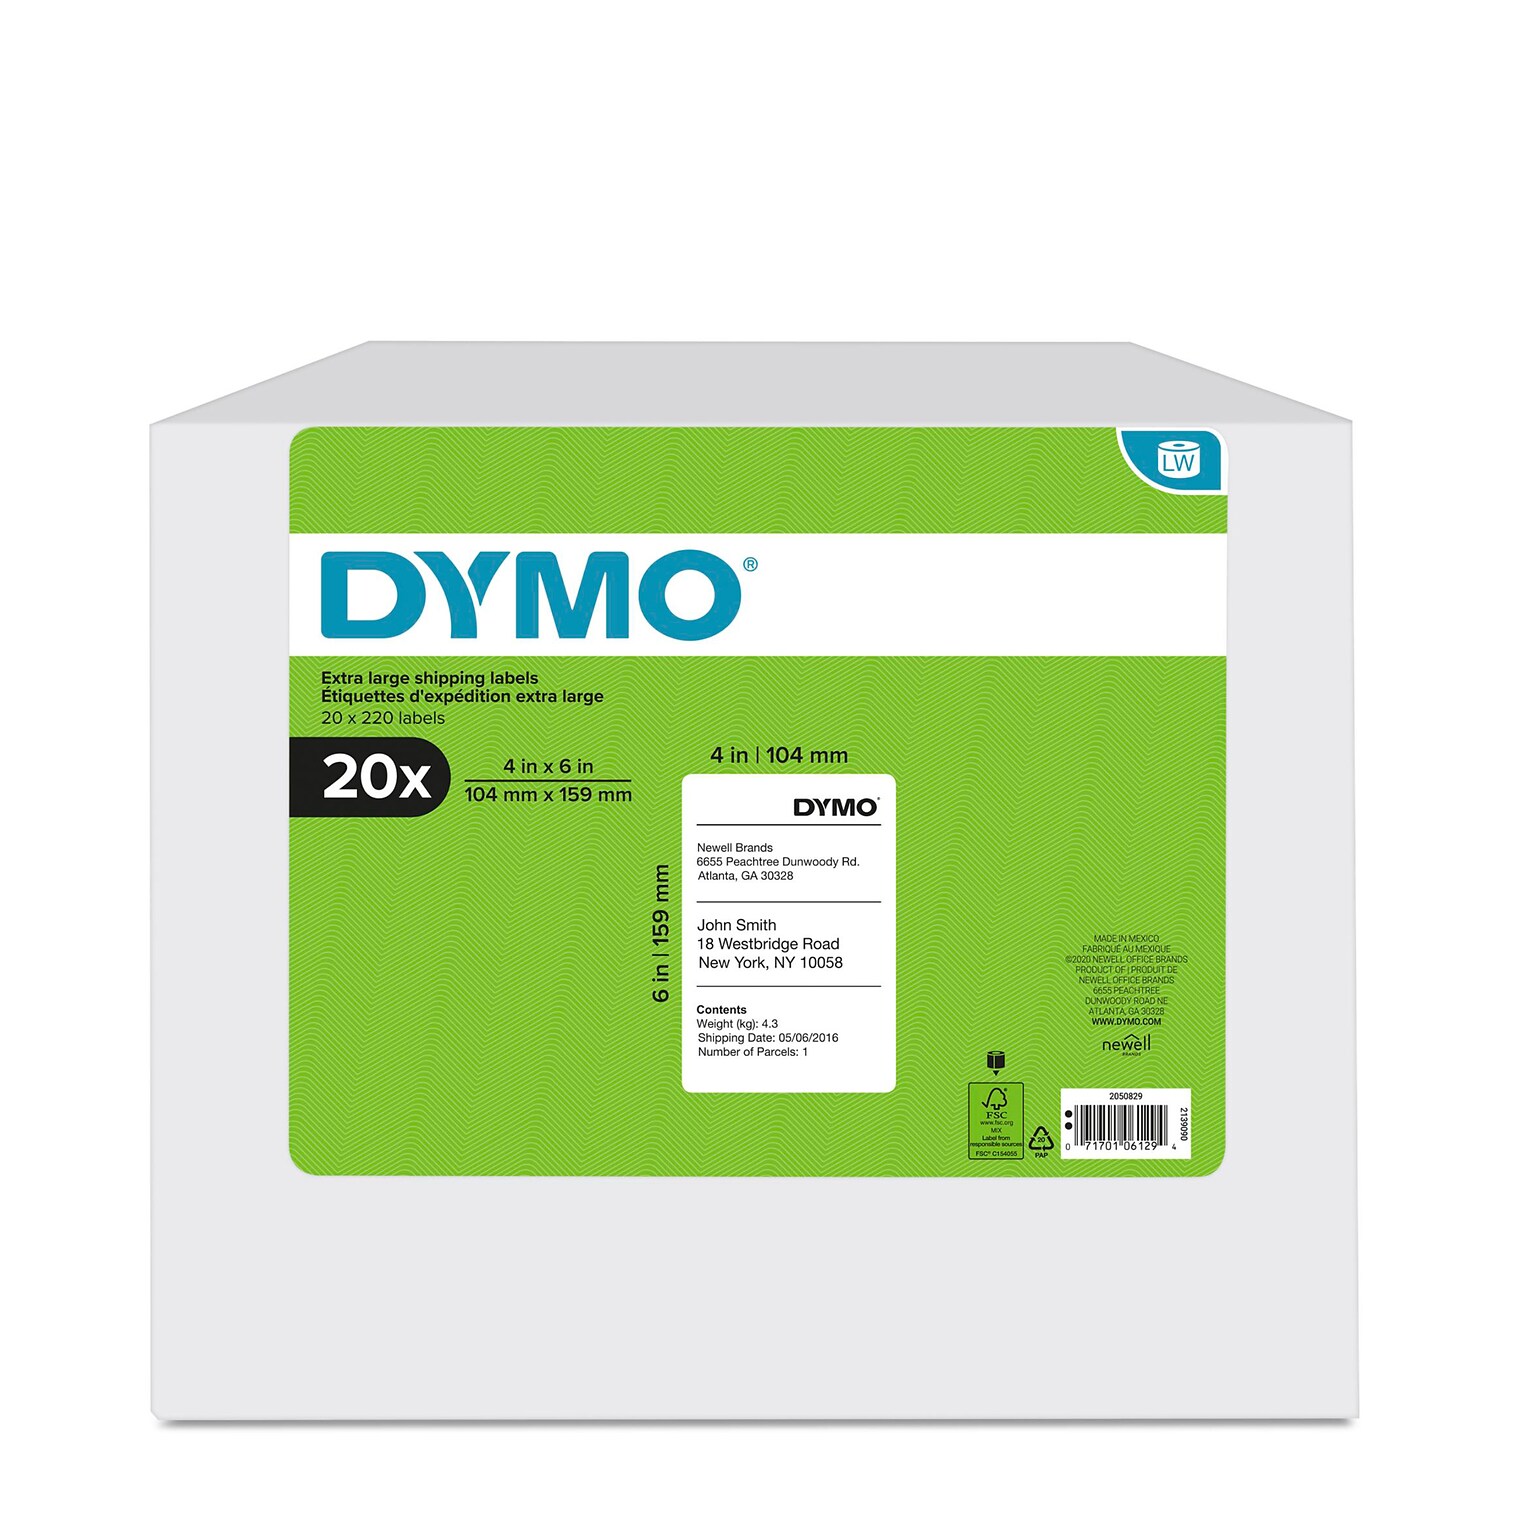 DYMO LabelWriter 2050829 Extra Large Shipping Labels, 4 x 6, Black on White, 220 Labels/Roll, 20 Rolls/Box (2050829)